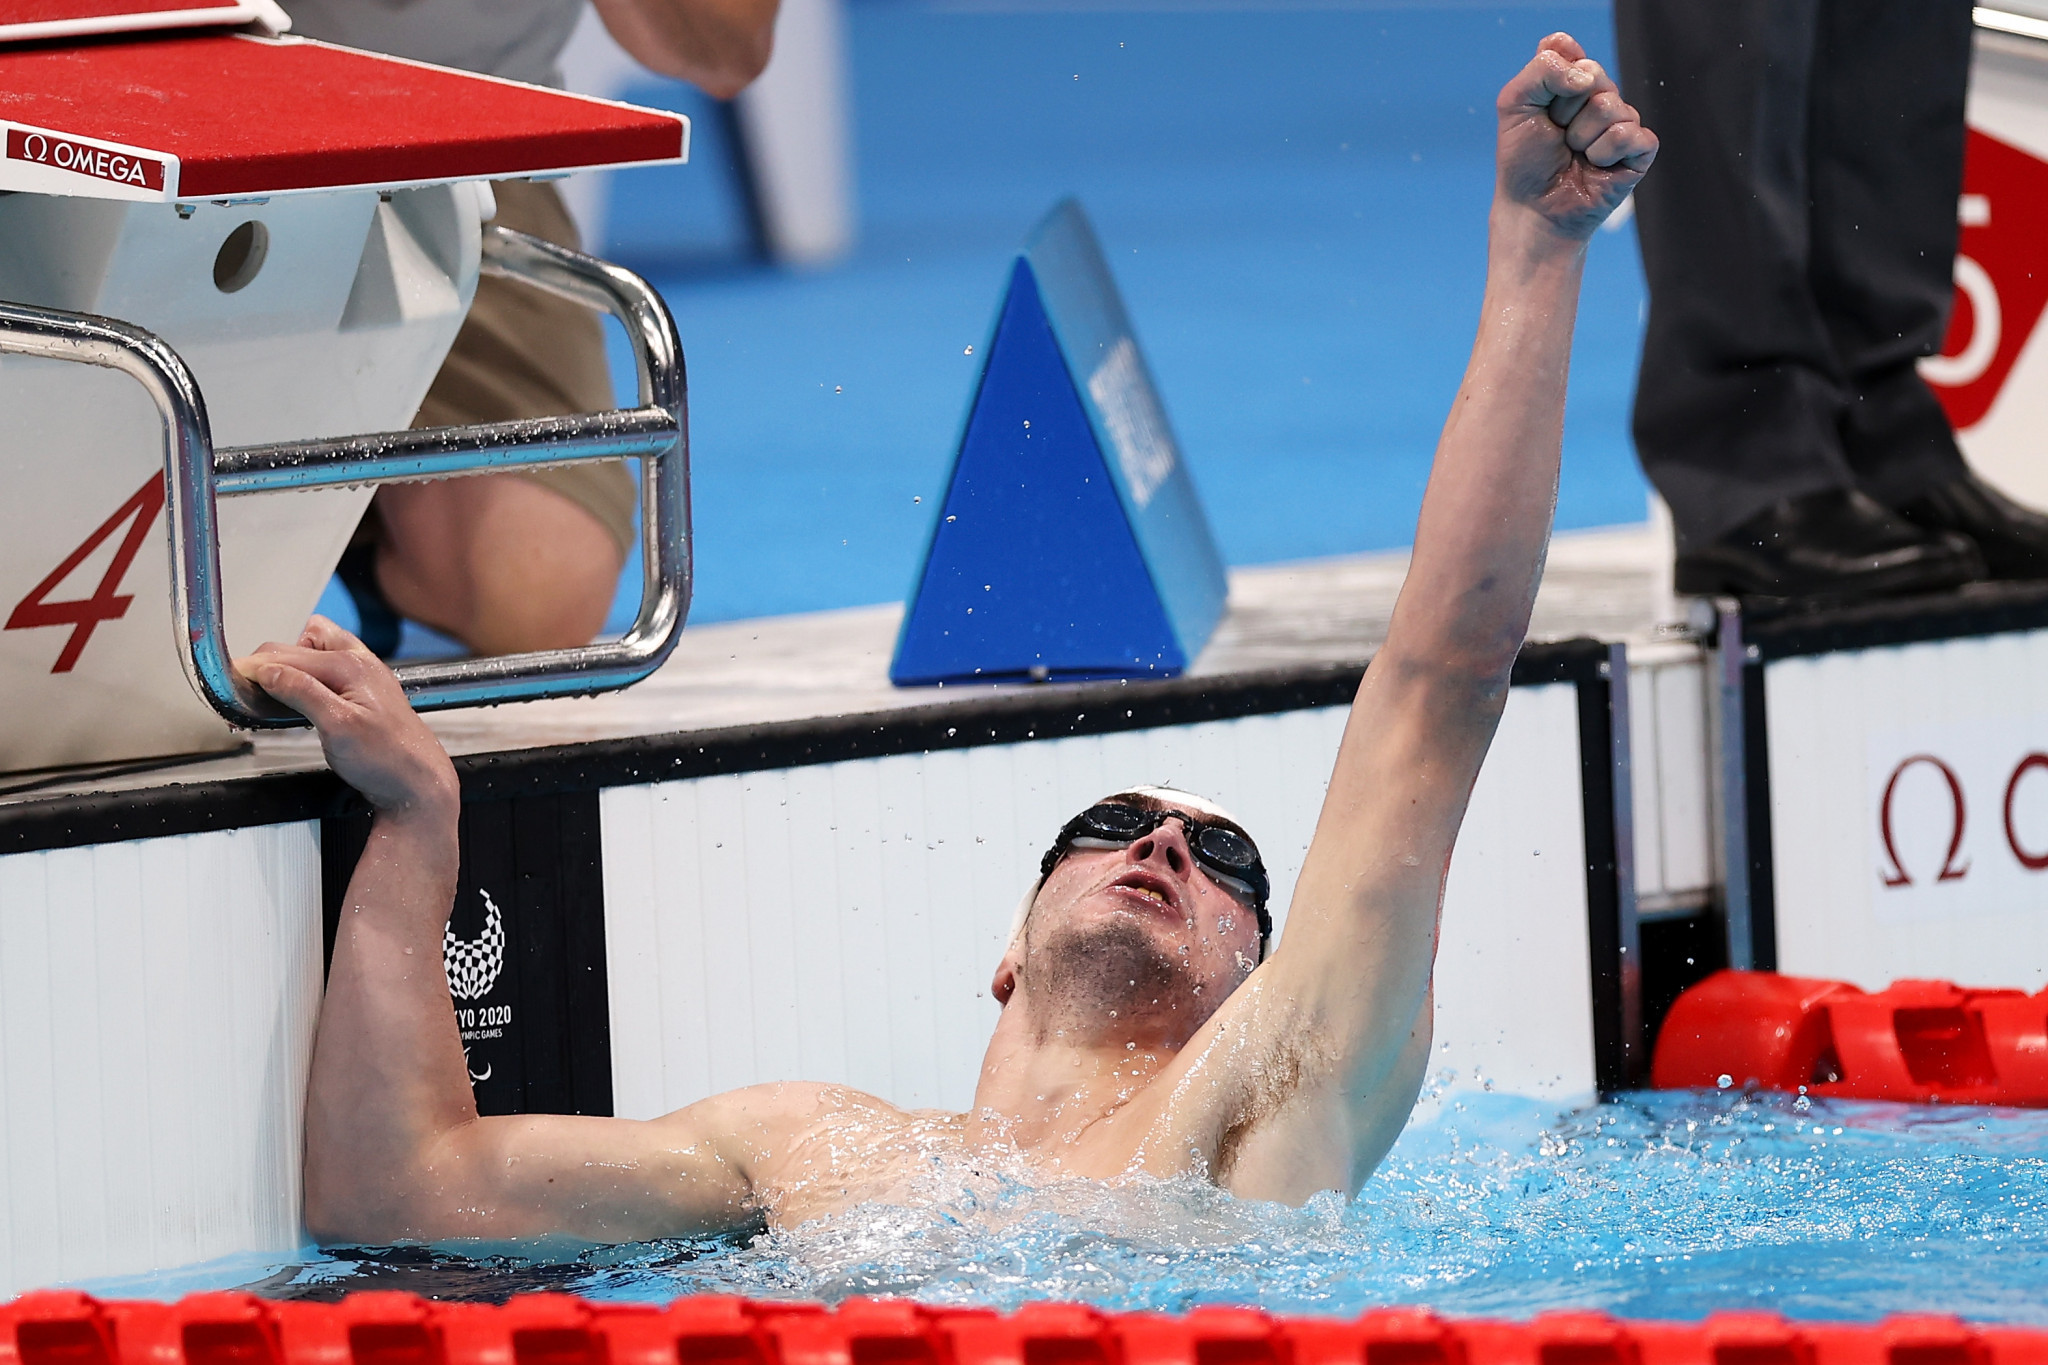 Israel’s Ami Omer Dadaon lowered his own world record to win men’s S4 200m freestyle 
gold ©Getty Images